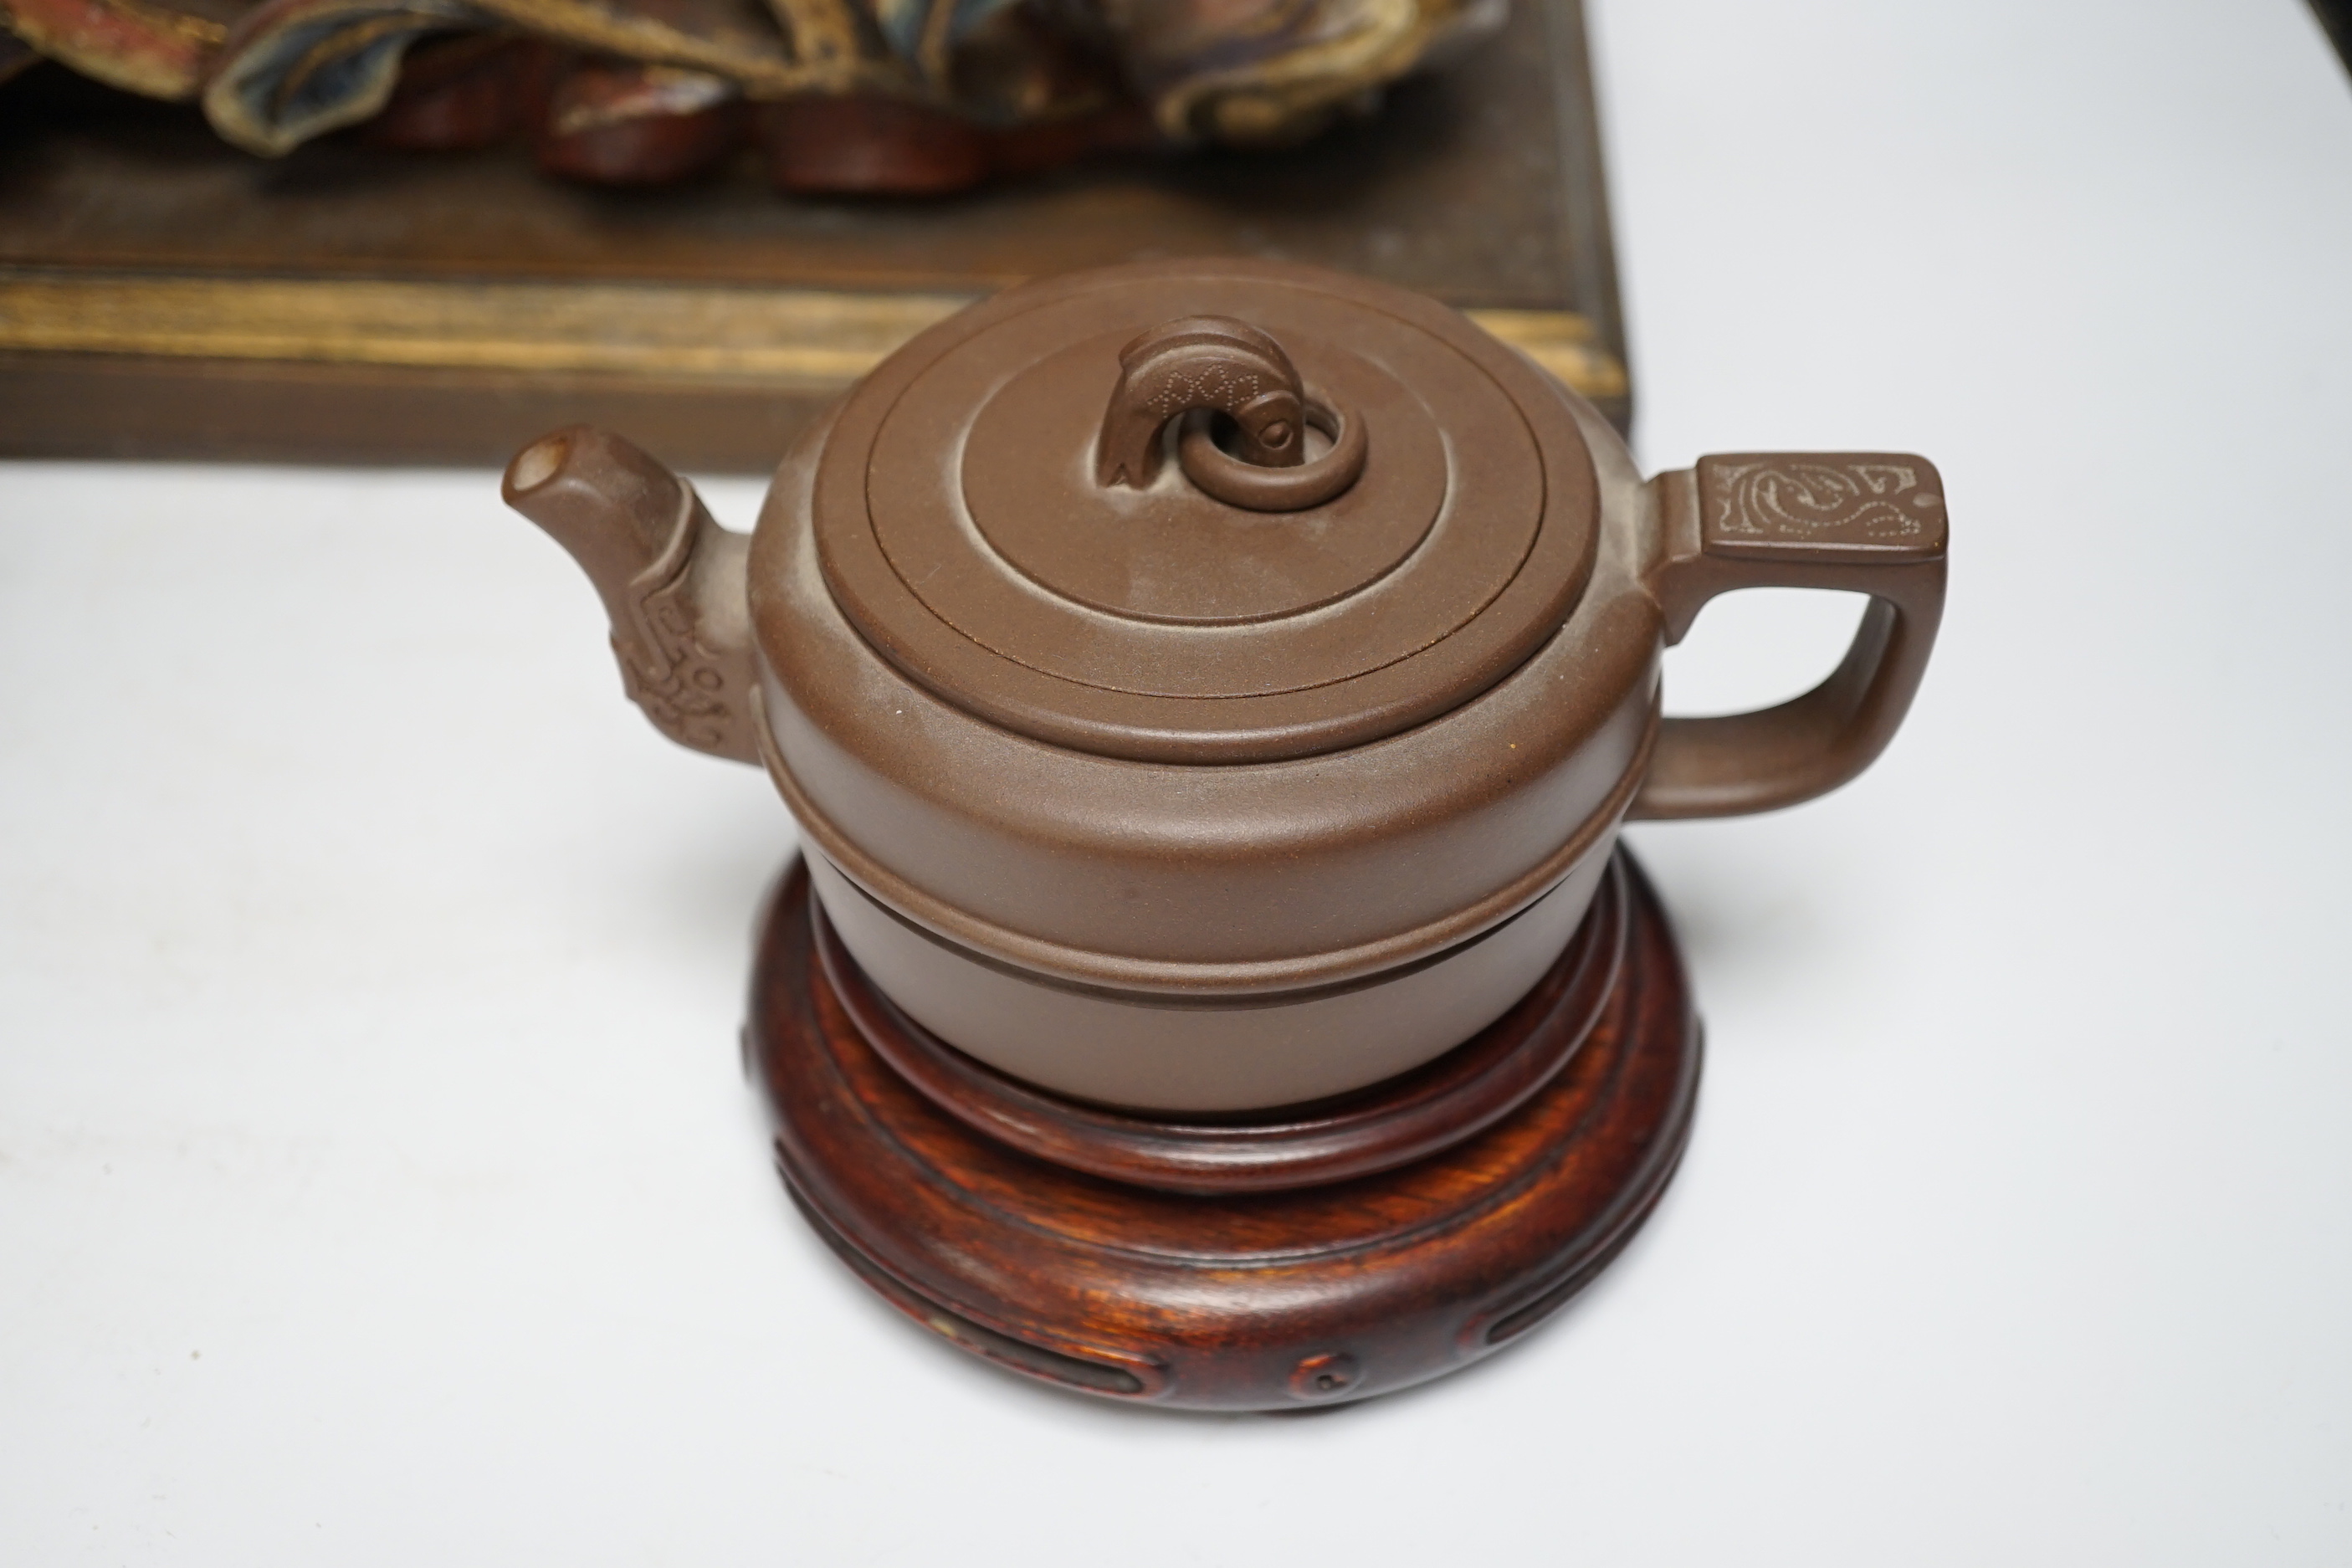 A Chinese floral wooden carving, 40cm wide, together with a Chinese cloisonné enamel vase and cover, 25cm tall, and a Chinese Yixing redware teapot